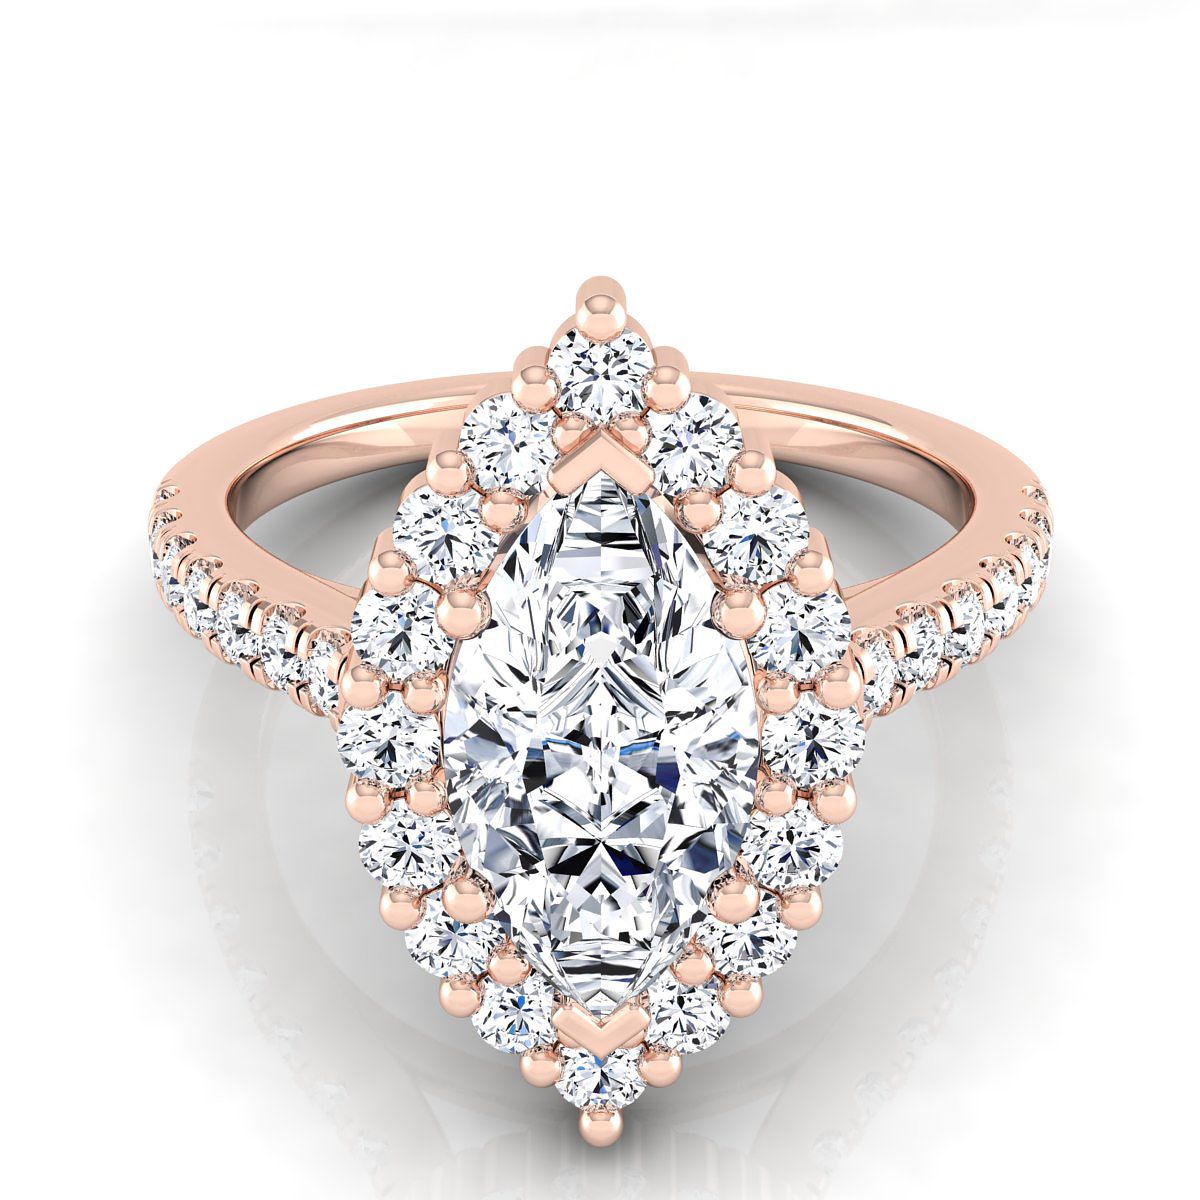 14K Rose Gold Marquise  Diamond Shared Prong Halo Engagement Ring -5/8ctw